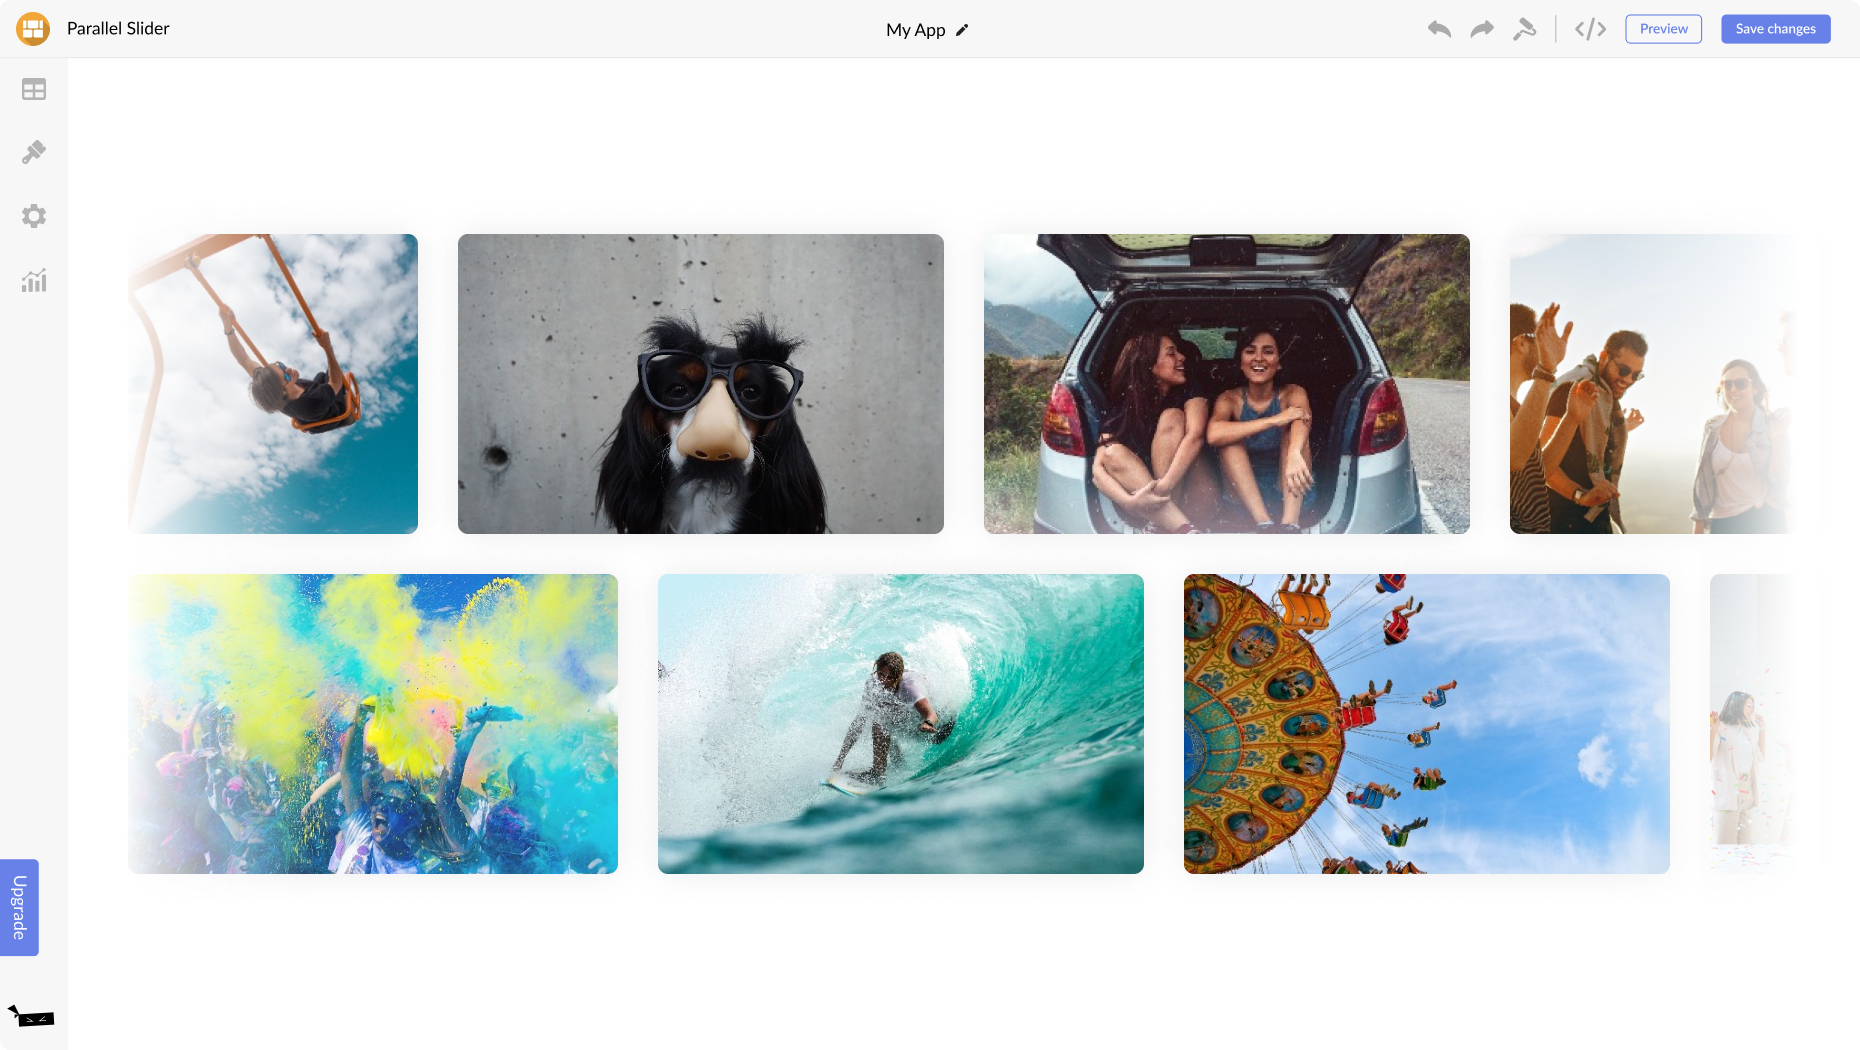 Multi-Row Image Slider for Microsoft Power Pages